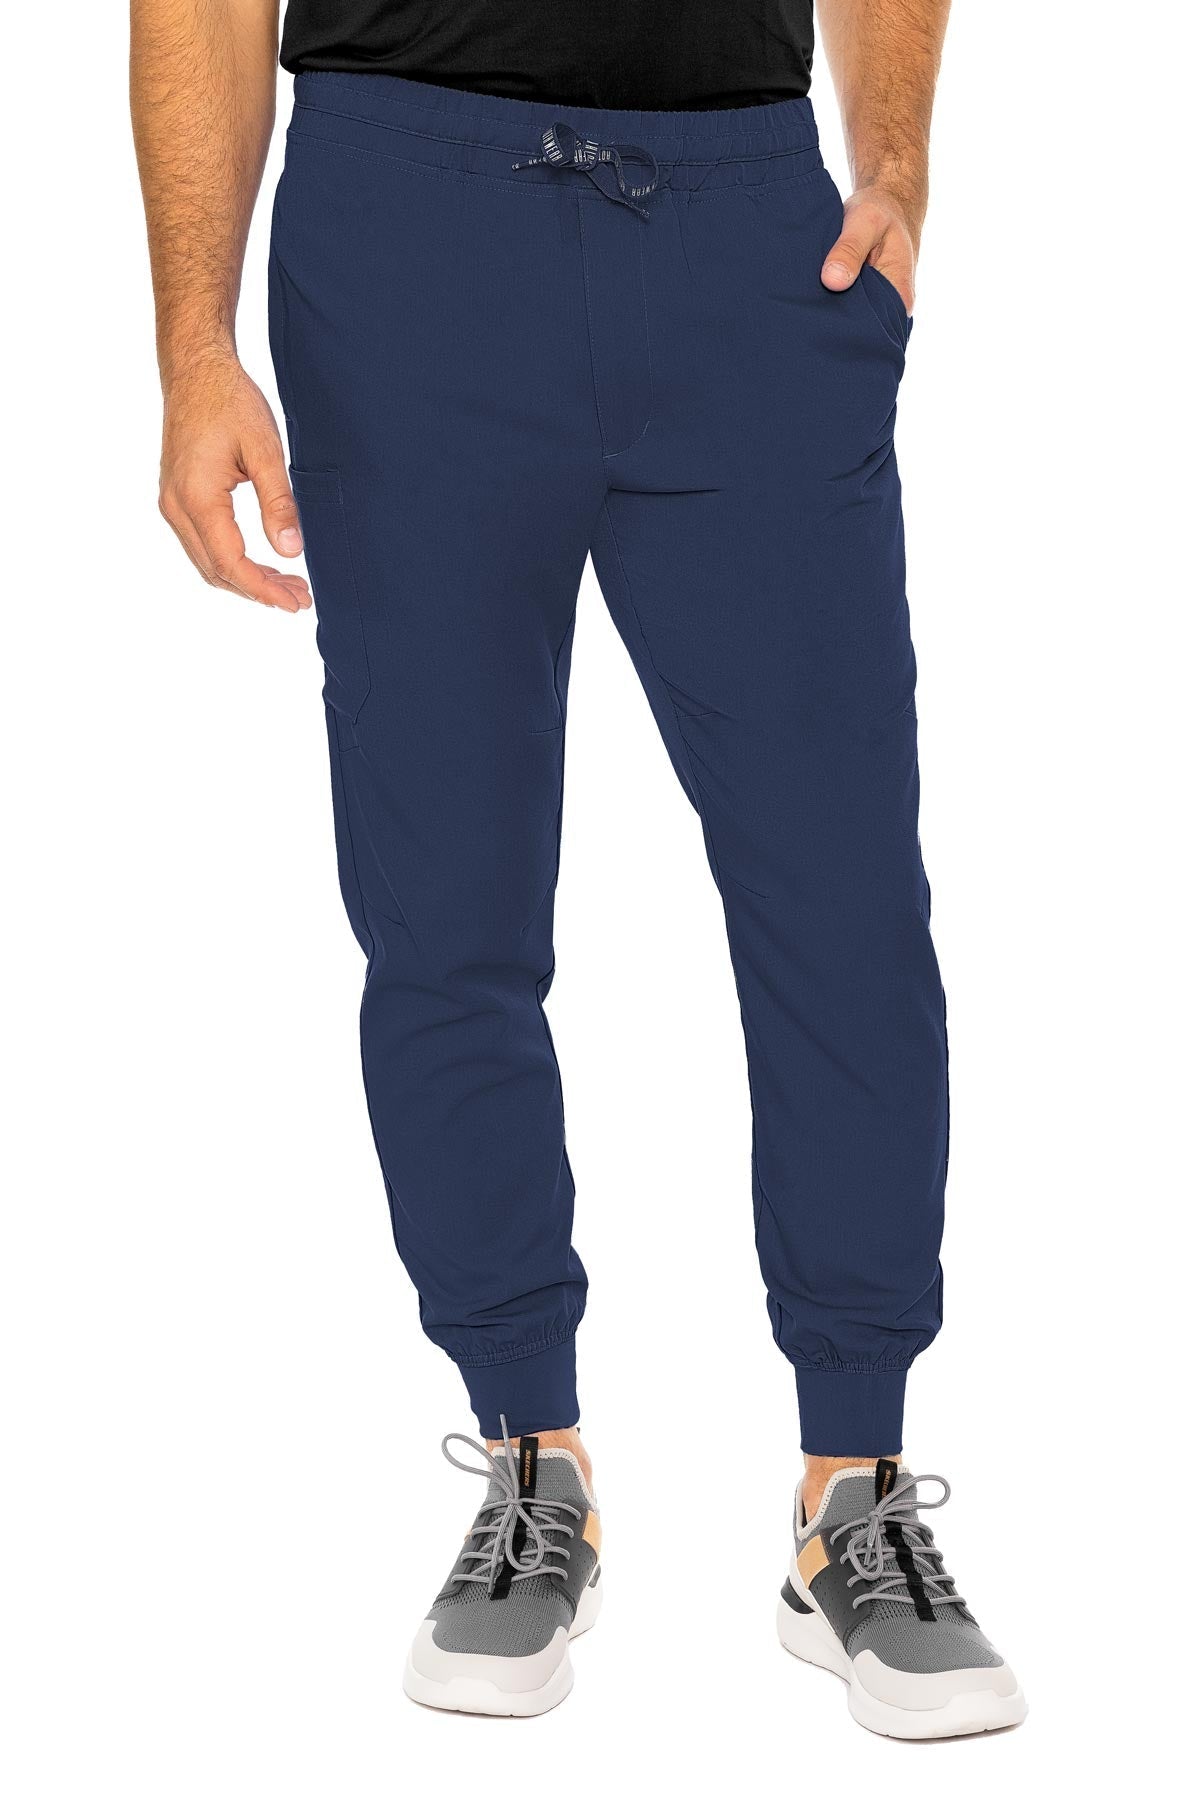 Med Couture 7777 Rothwear Bowen Jogger - Navy